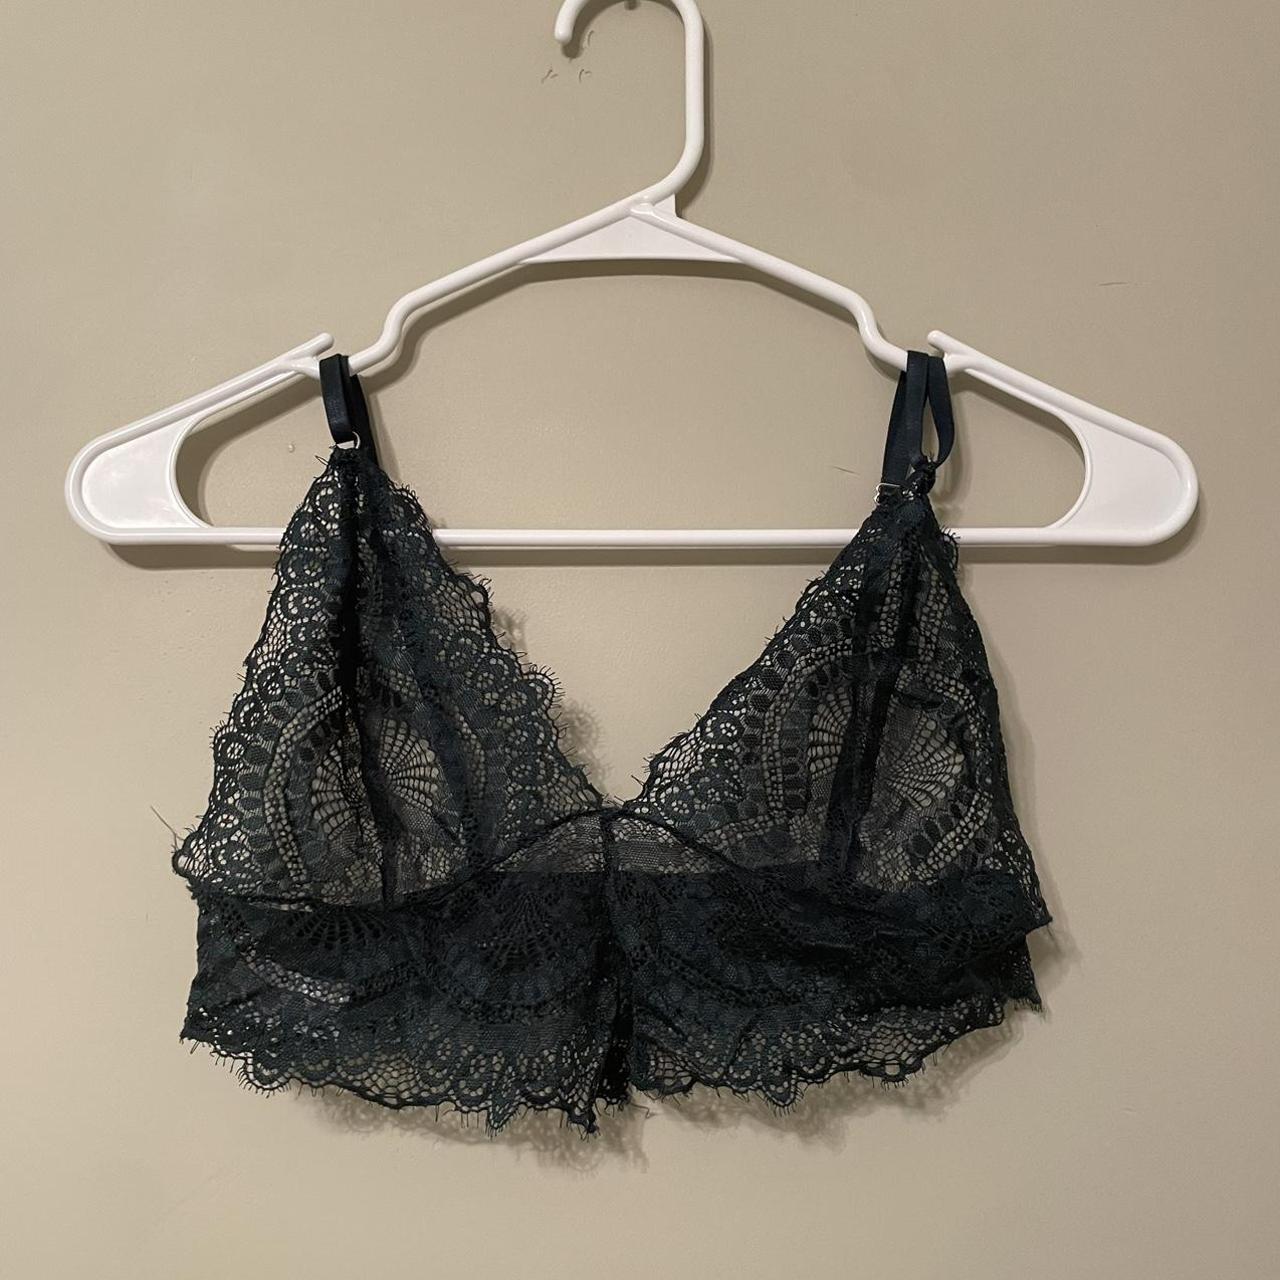 2 pc lace bra by SHEIN size Large but fits like a